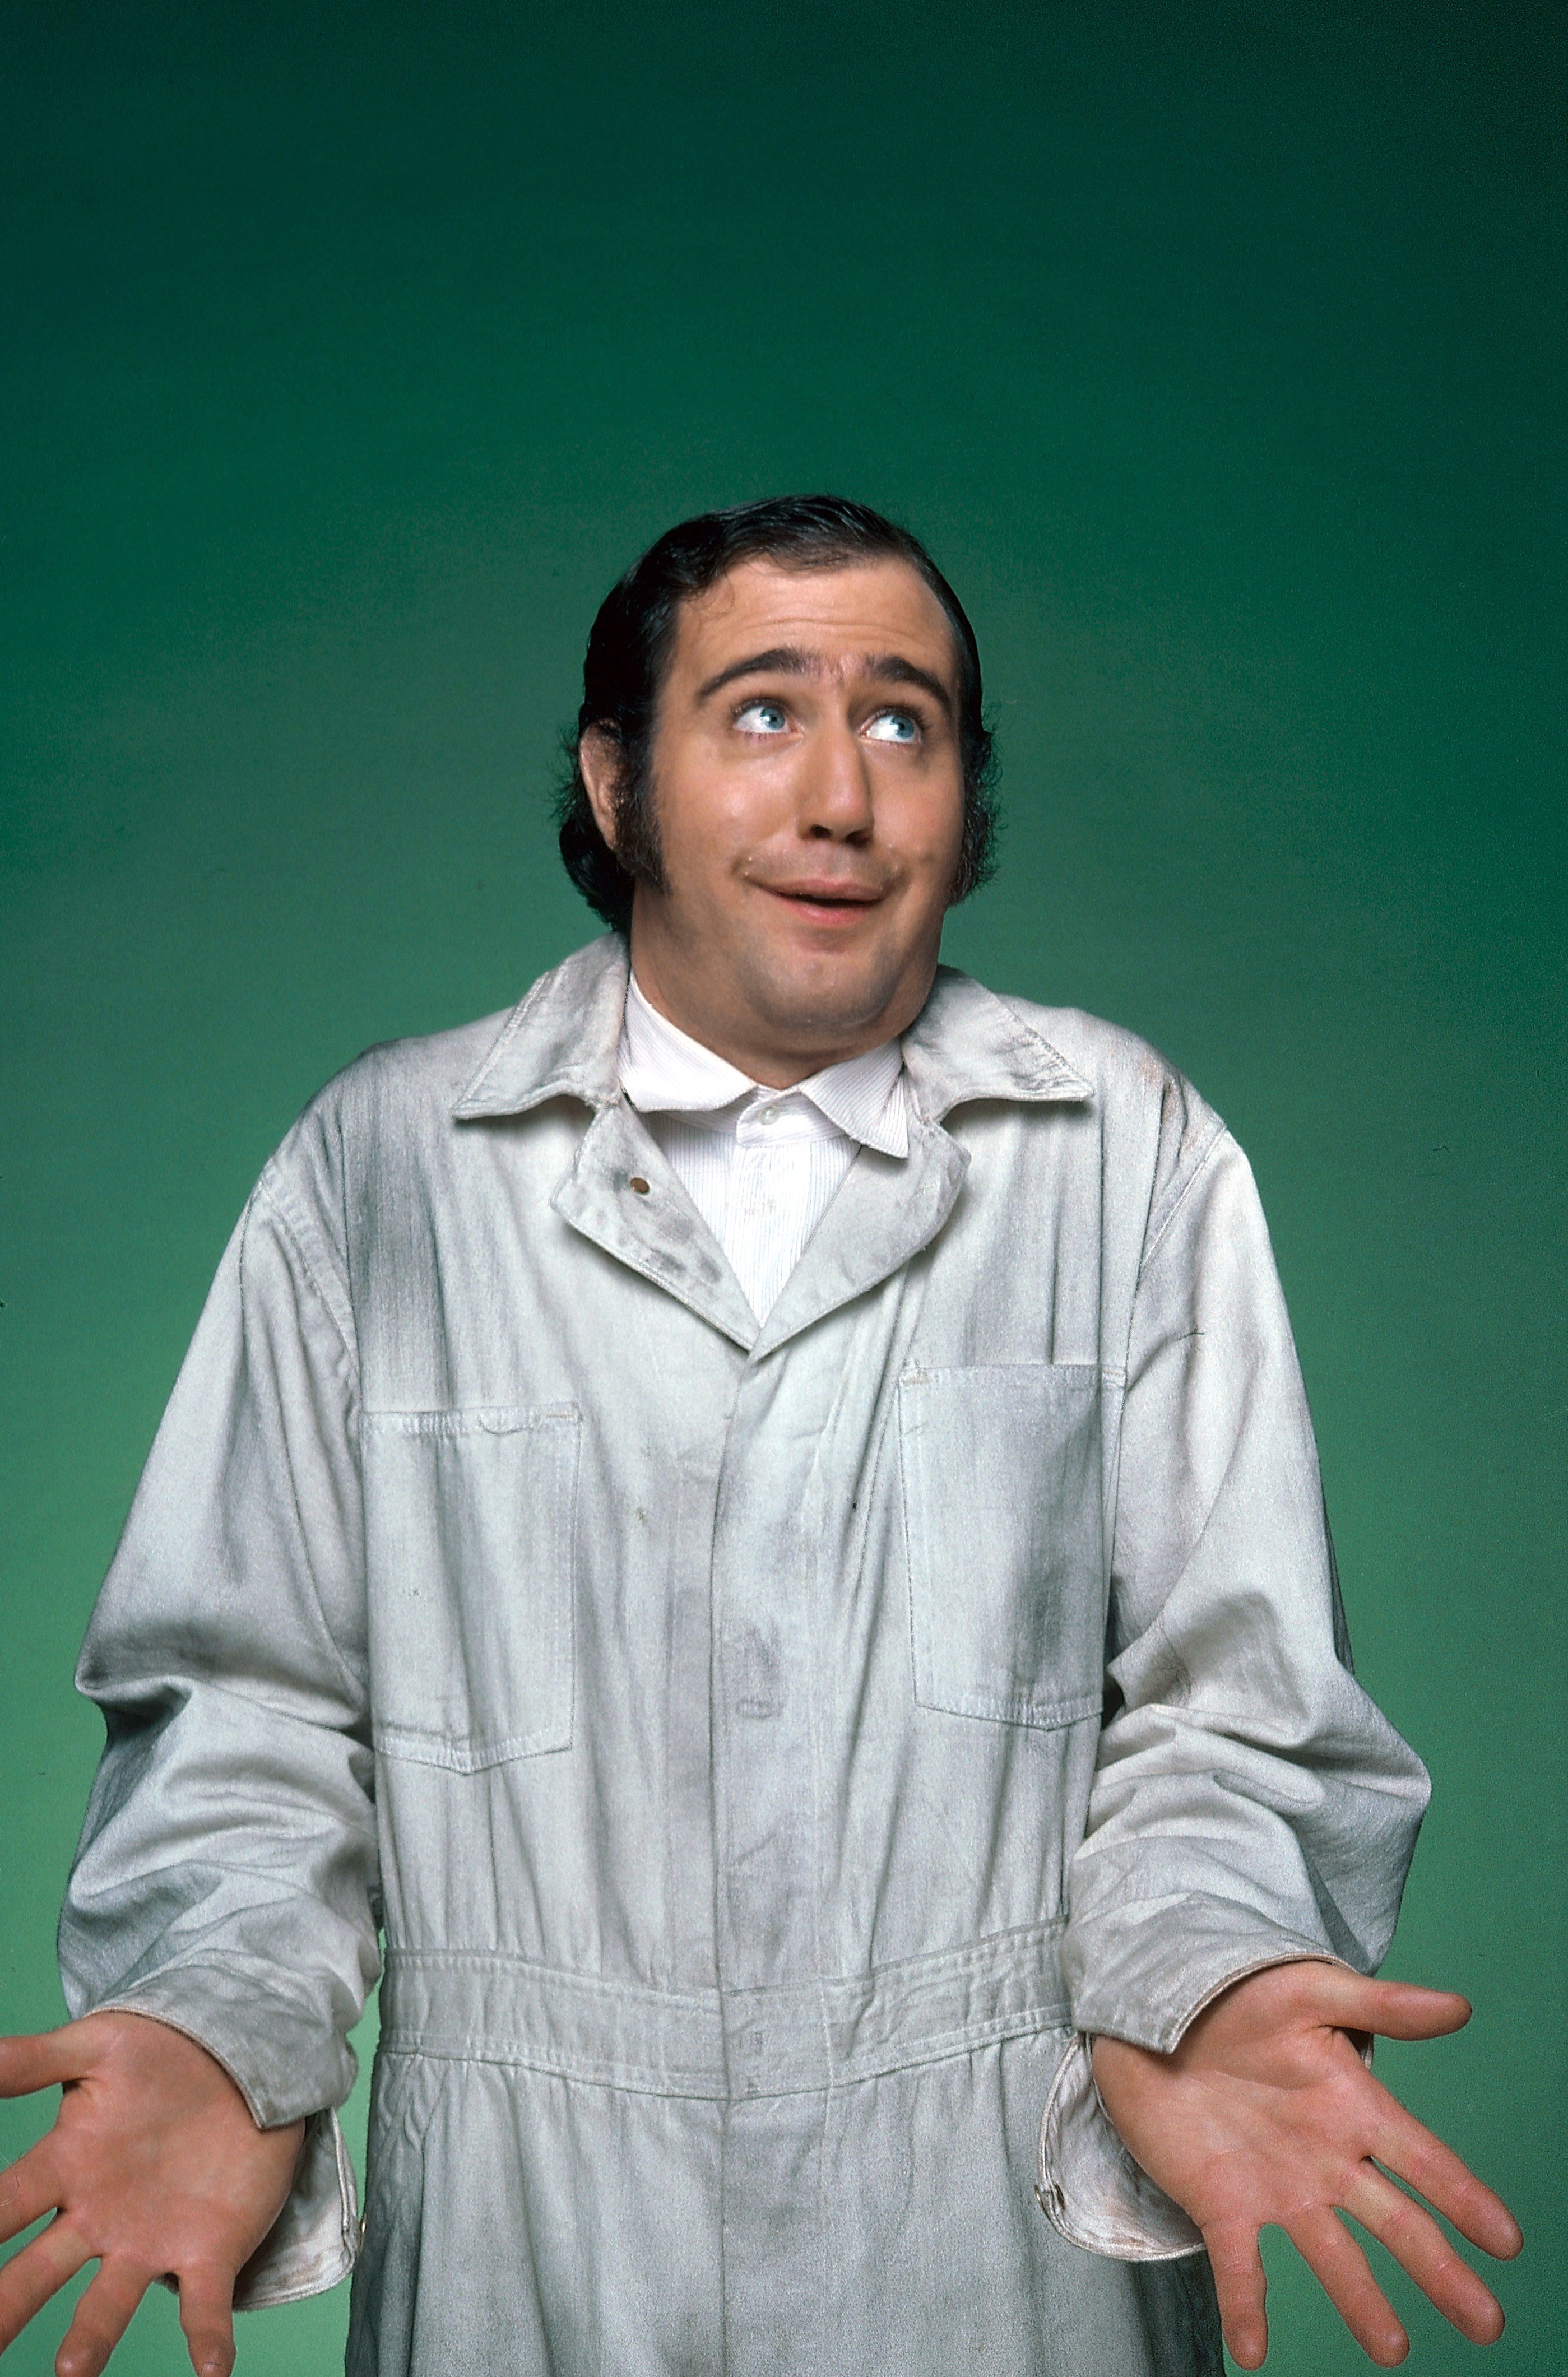 Andy Kaufman pictured as in character in Taxi, 1978. | Photo: Getty Images